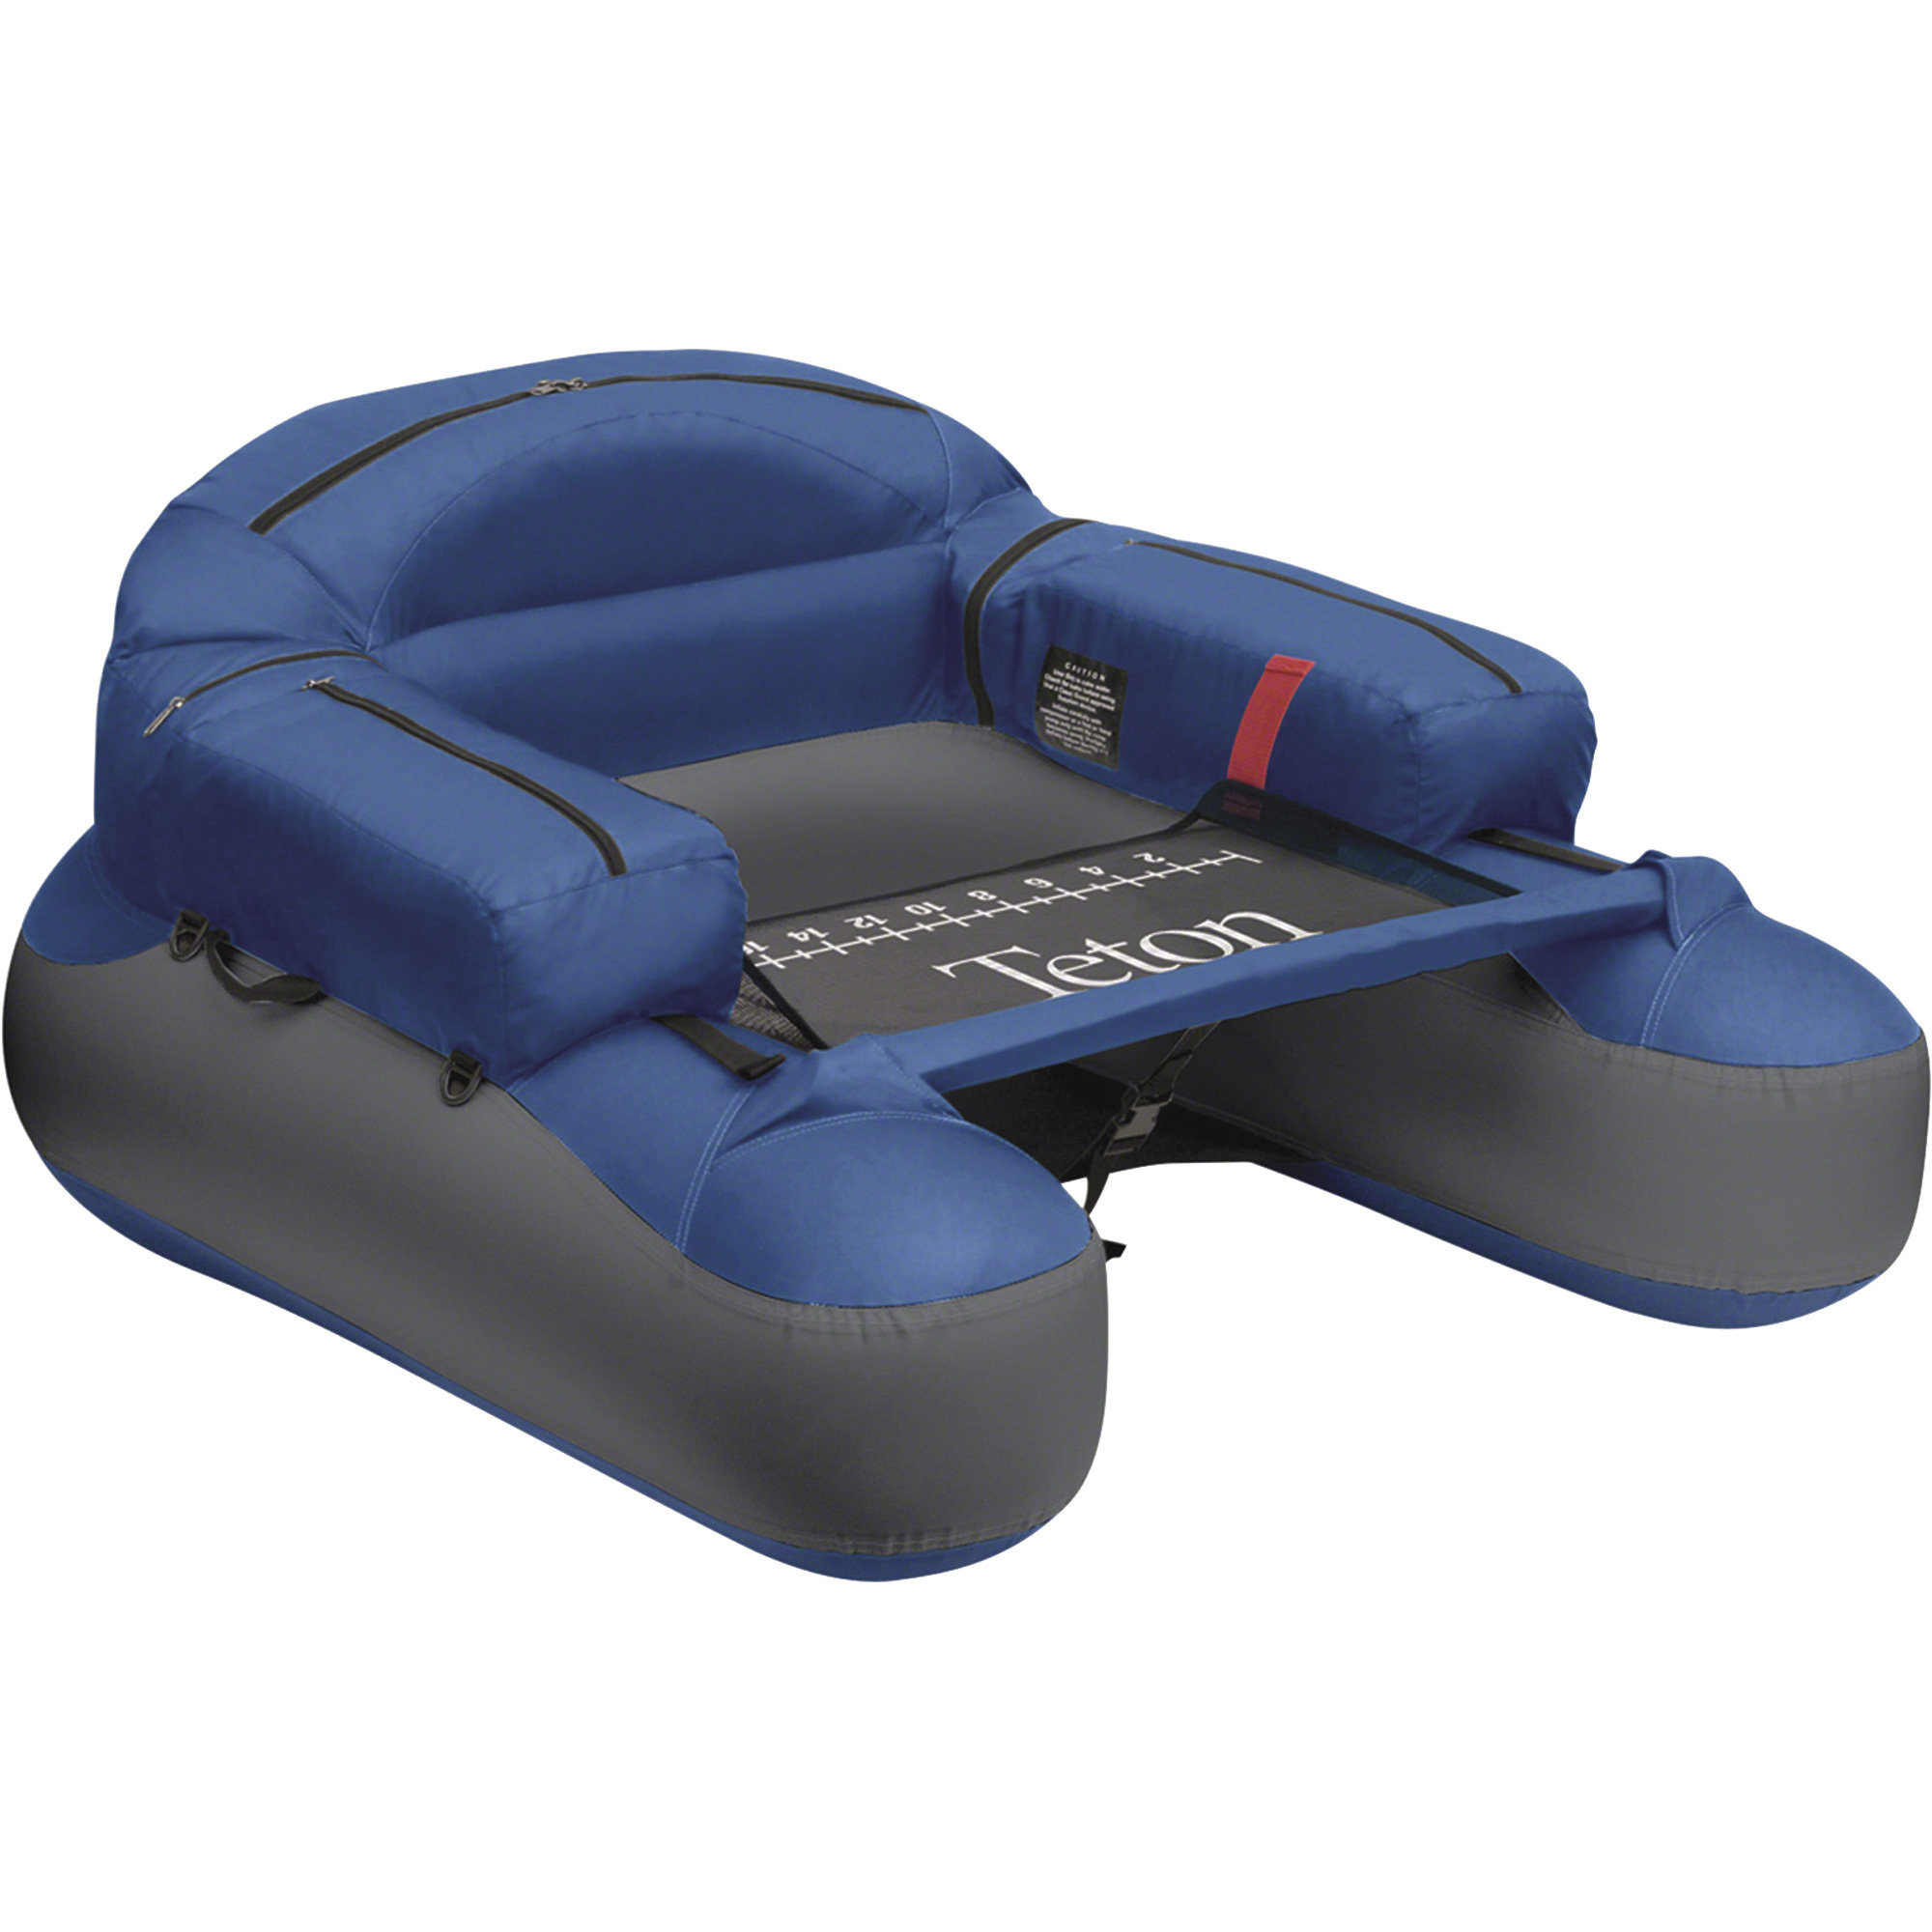 Classic Accessories Teton Float Tube, Size: One size, Blue